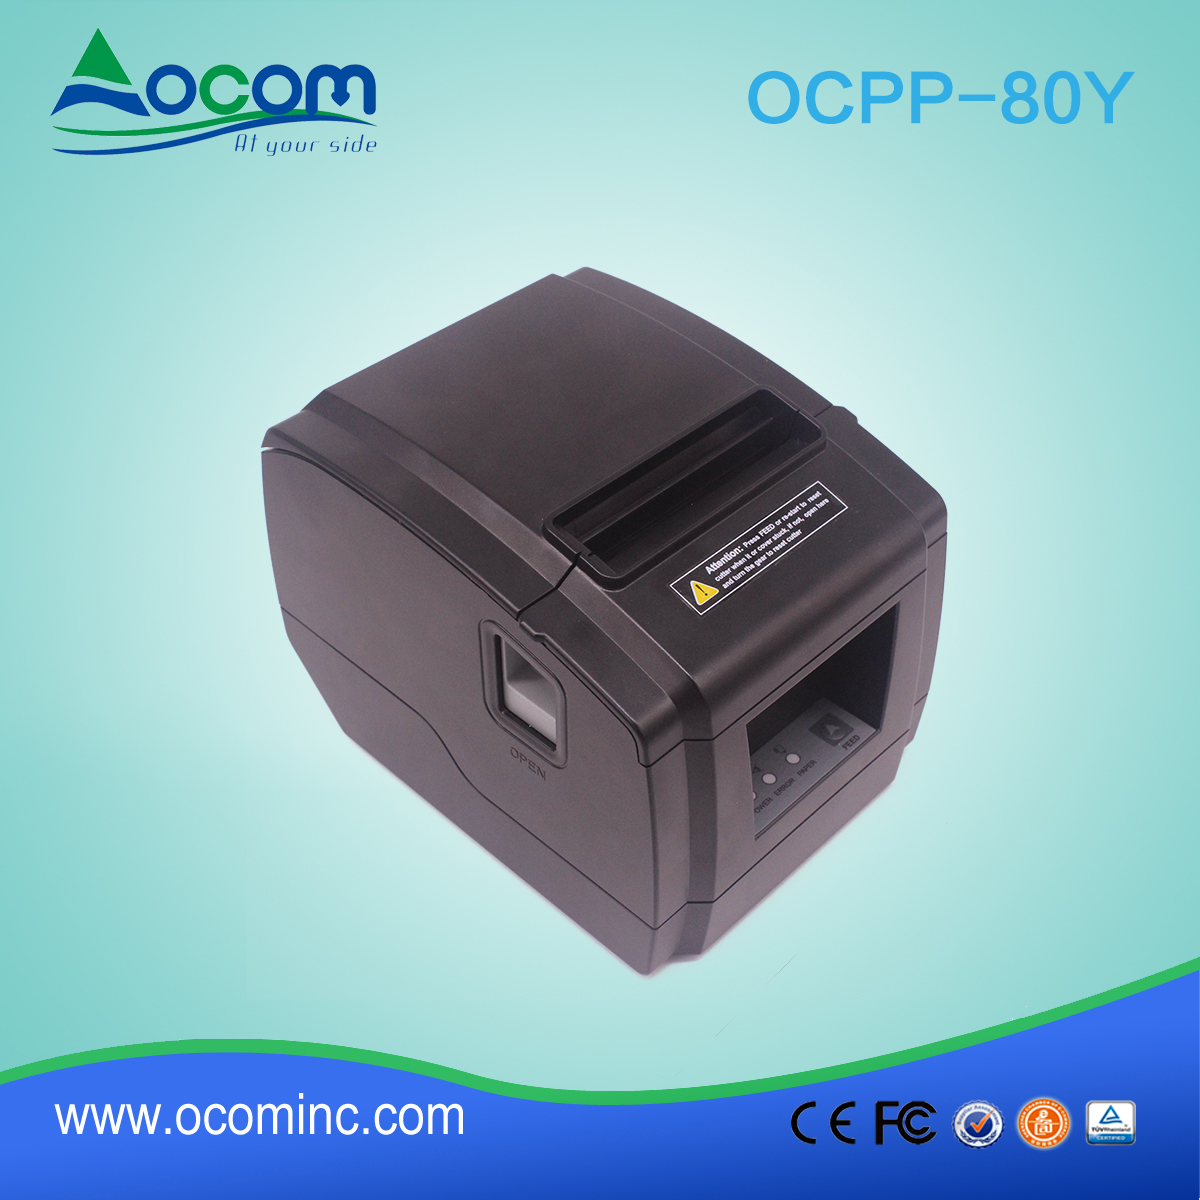 OCPP-80Y-low cost 80mm stampante termica per ricevute all'ingrosso